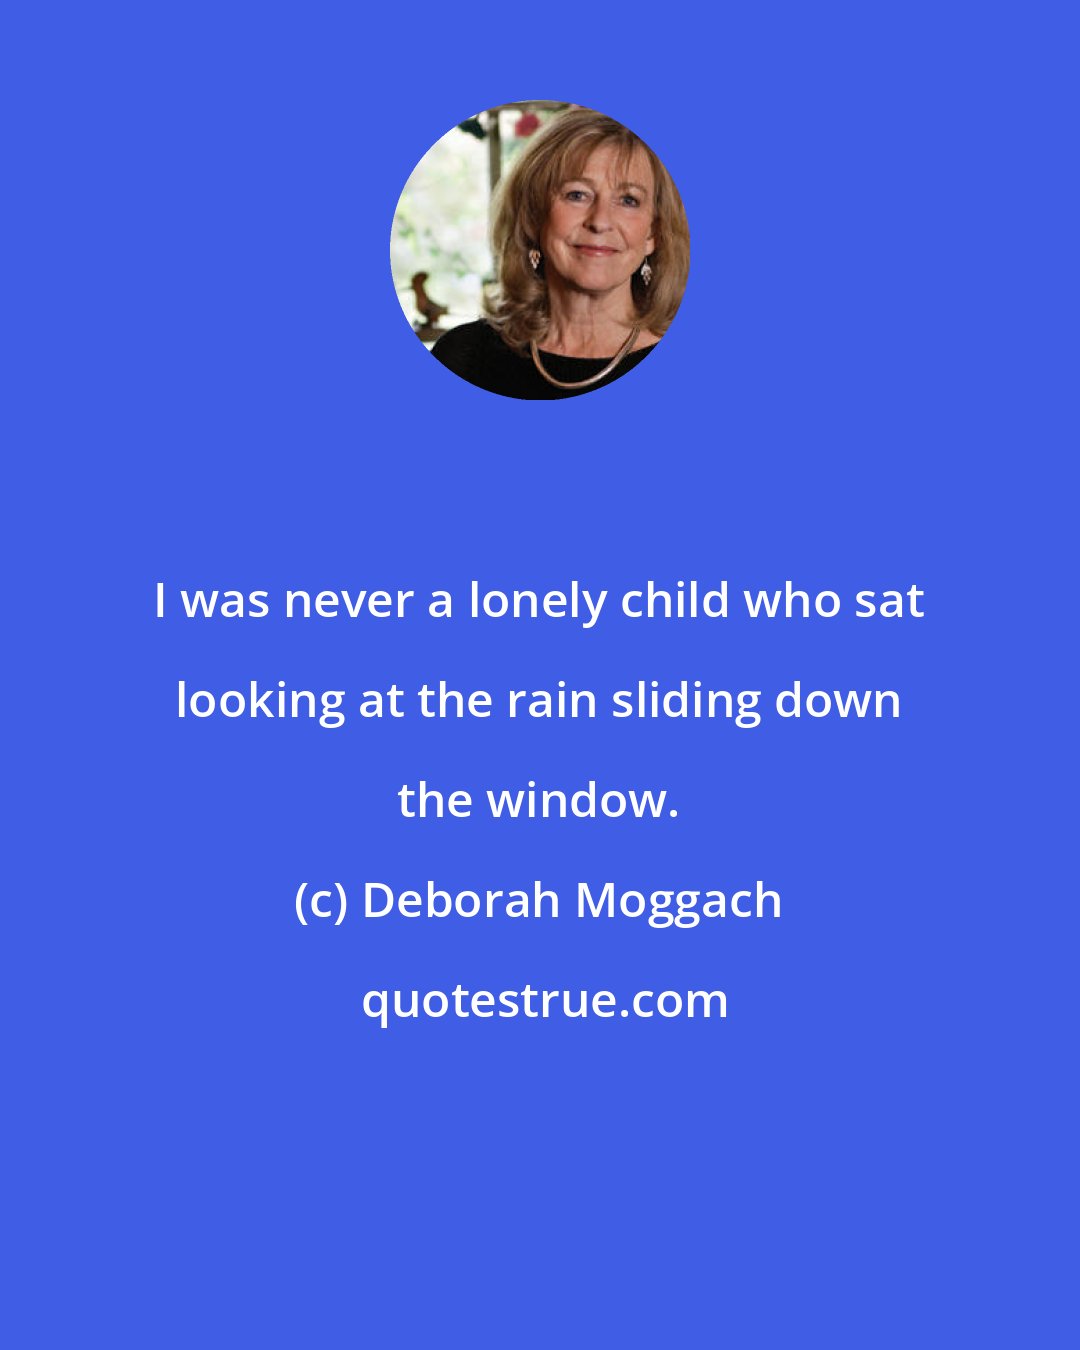 Deborah Moggach: I was never a lonely child who sat looking at the rain sliding down the window.